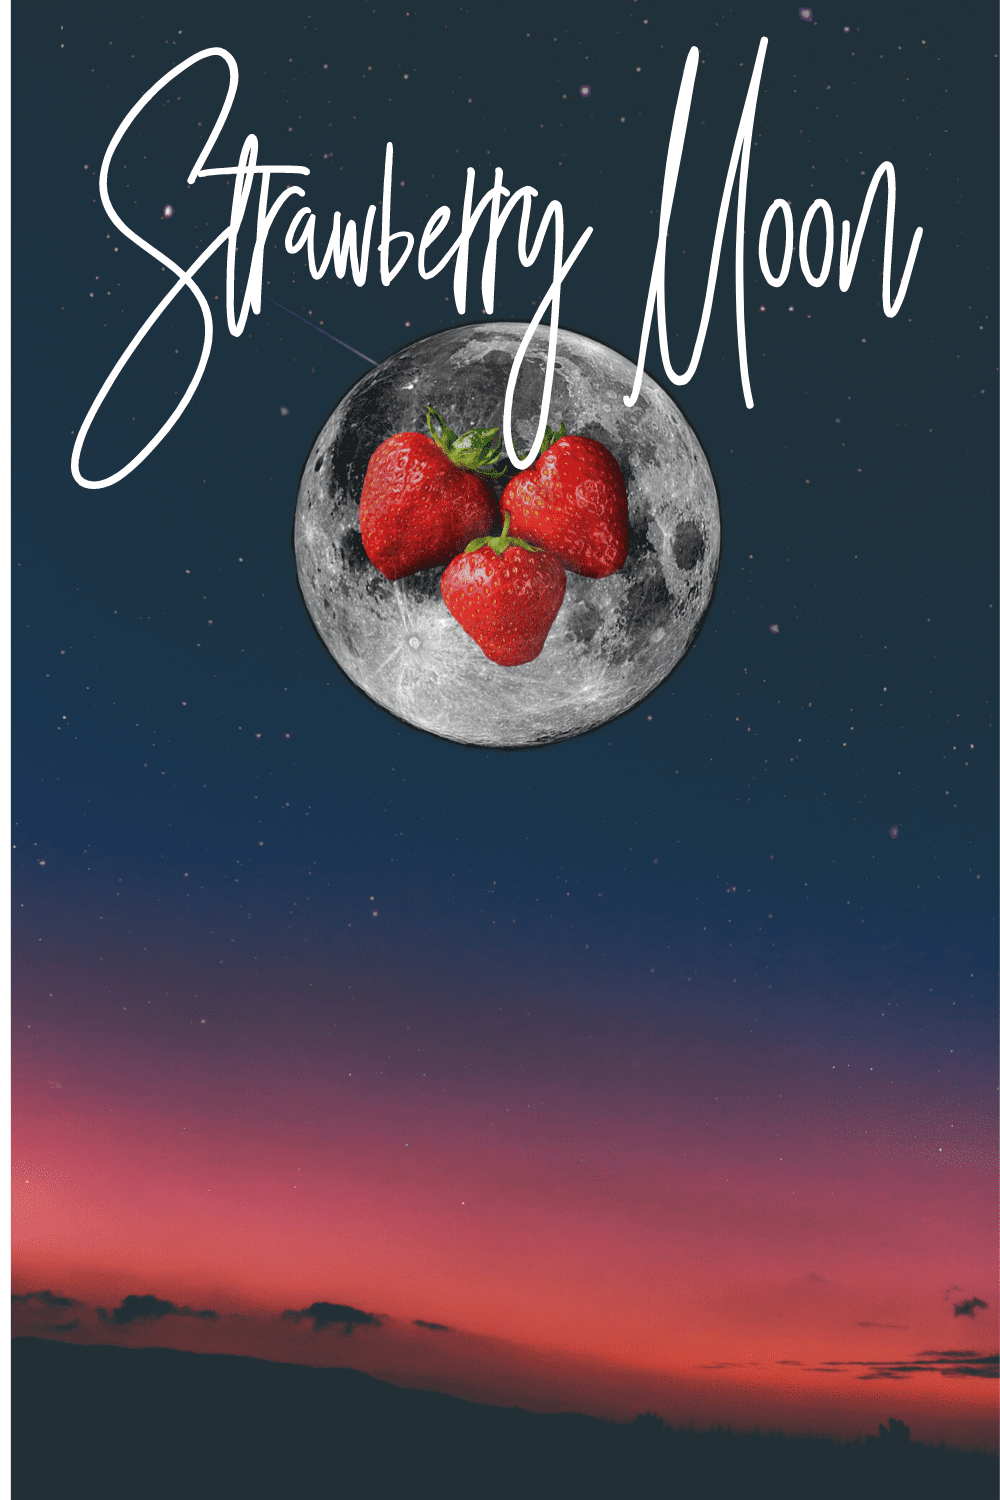 June Full Moon with strawberries under a blue red sky.